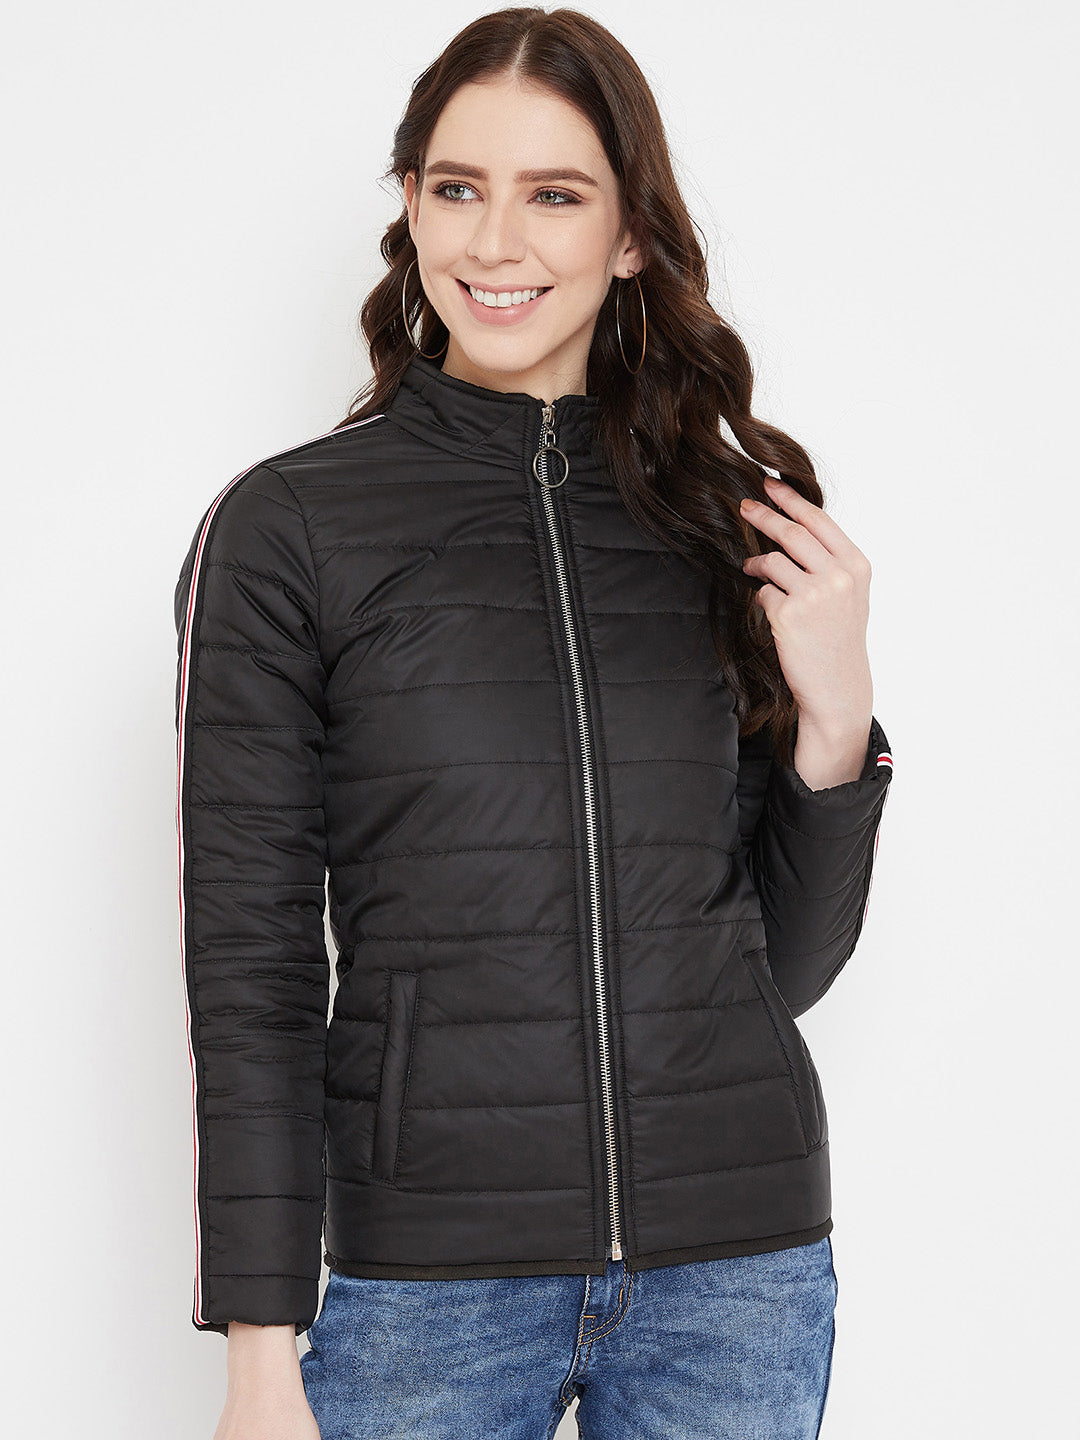 Austin Wood Women's Black Solid Full Sleeves High Neck Padded Jacket With Size Tape